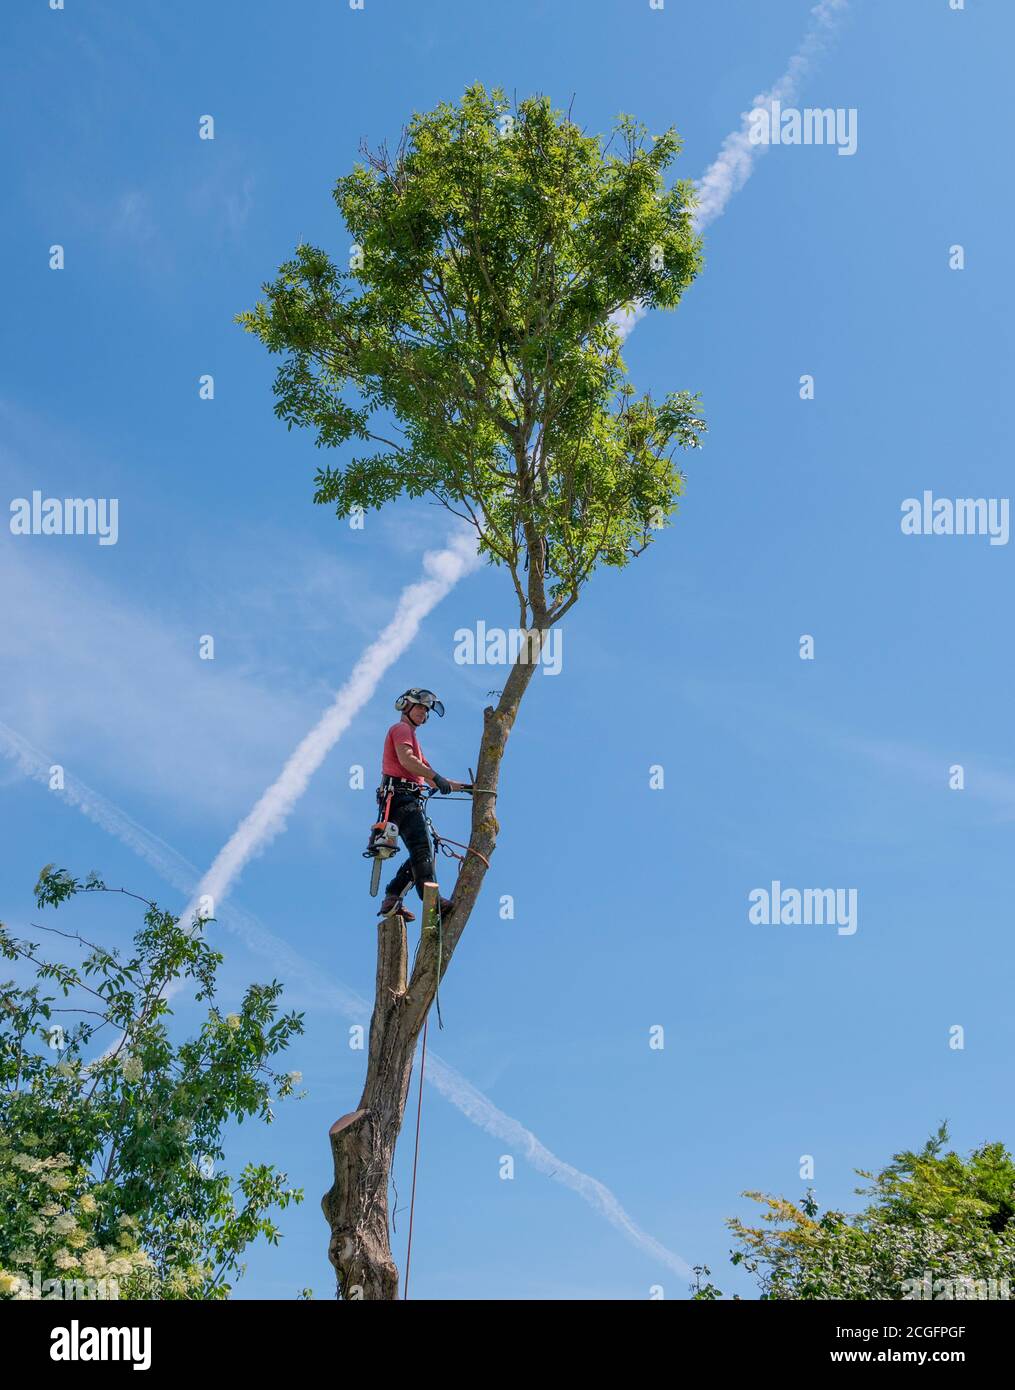 Arborist or tree Surgeon cutting down tall tree using safety ropes. Stock Photo